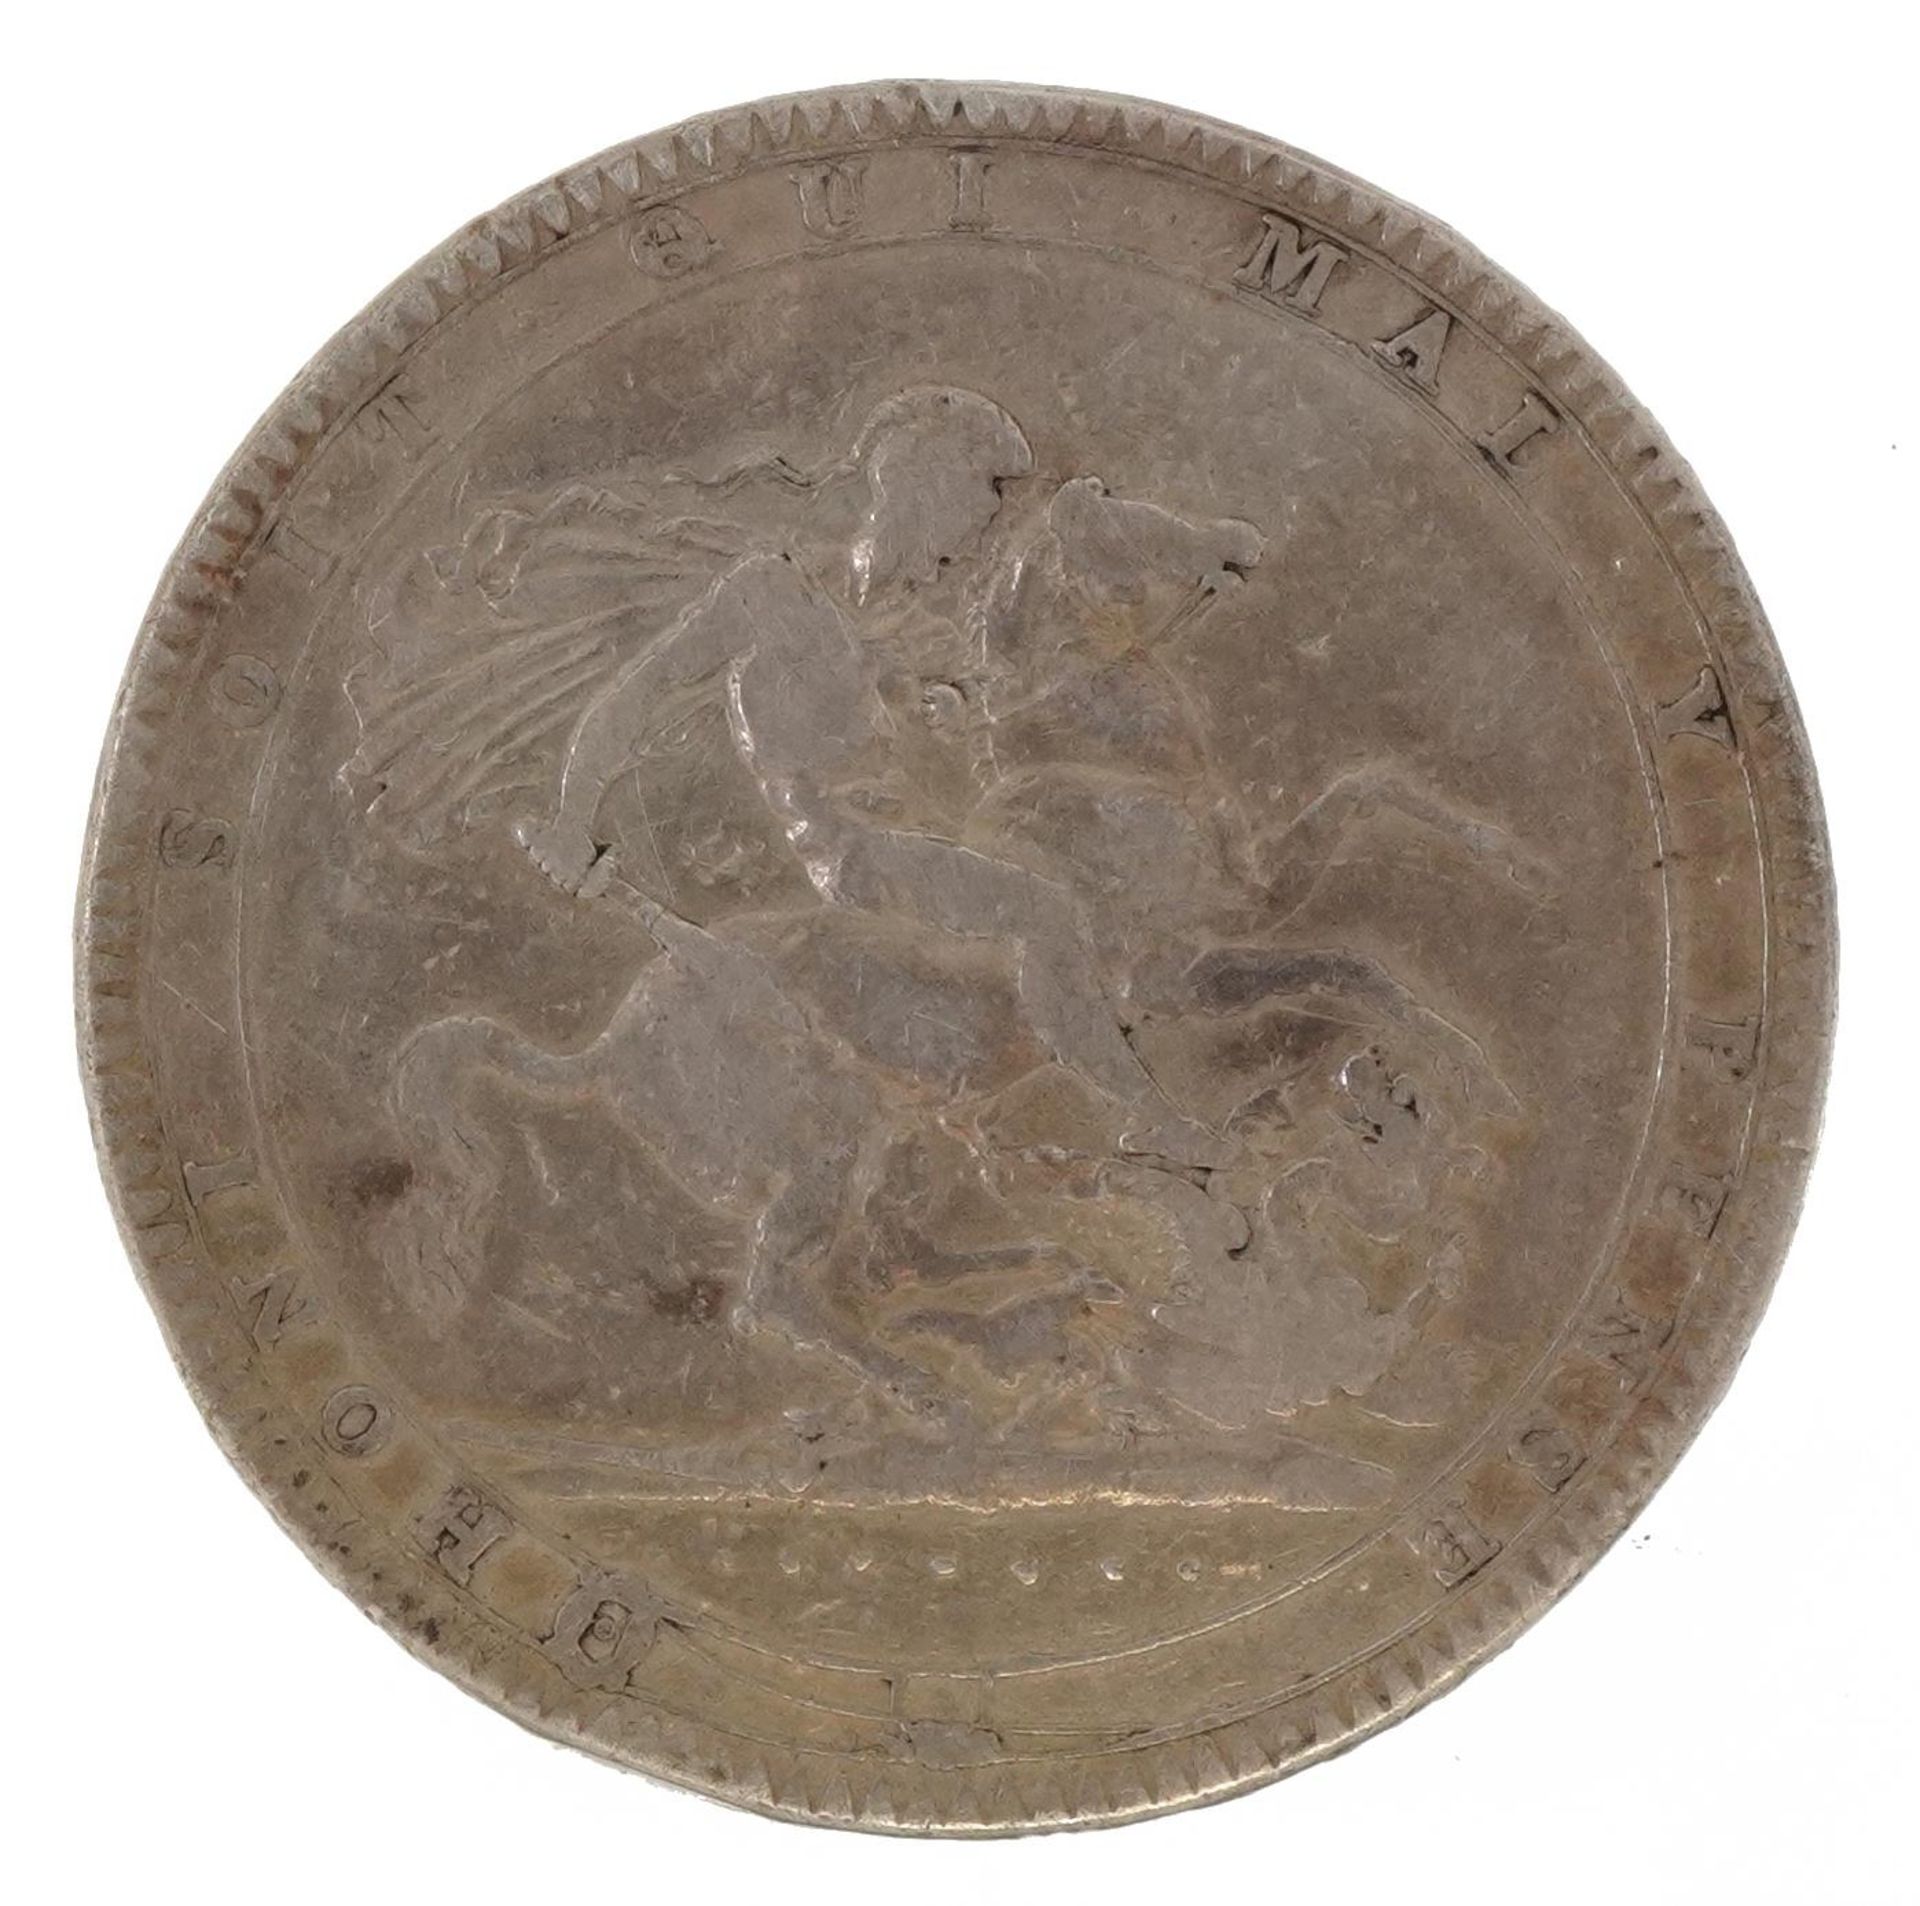 George III 1819 silver crown : For further information on this lot please visit Eastbourneauction.